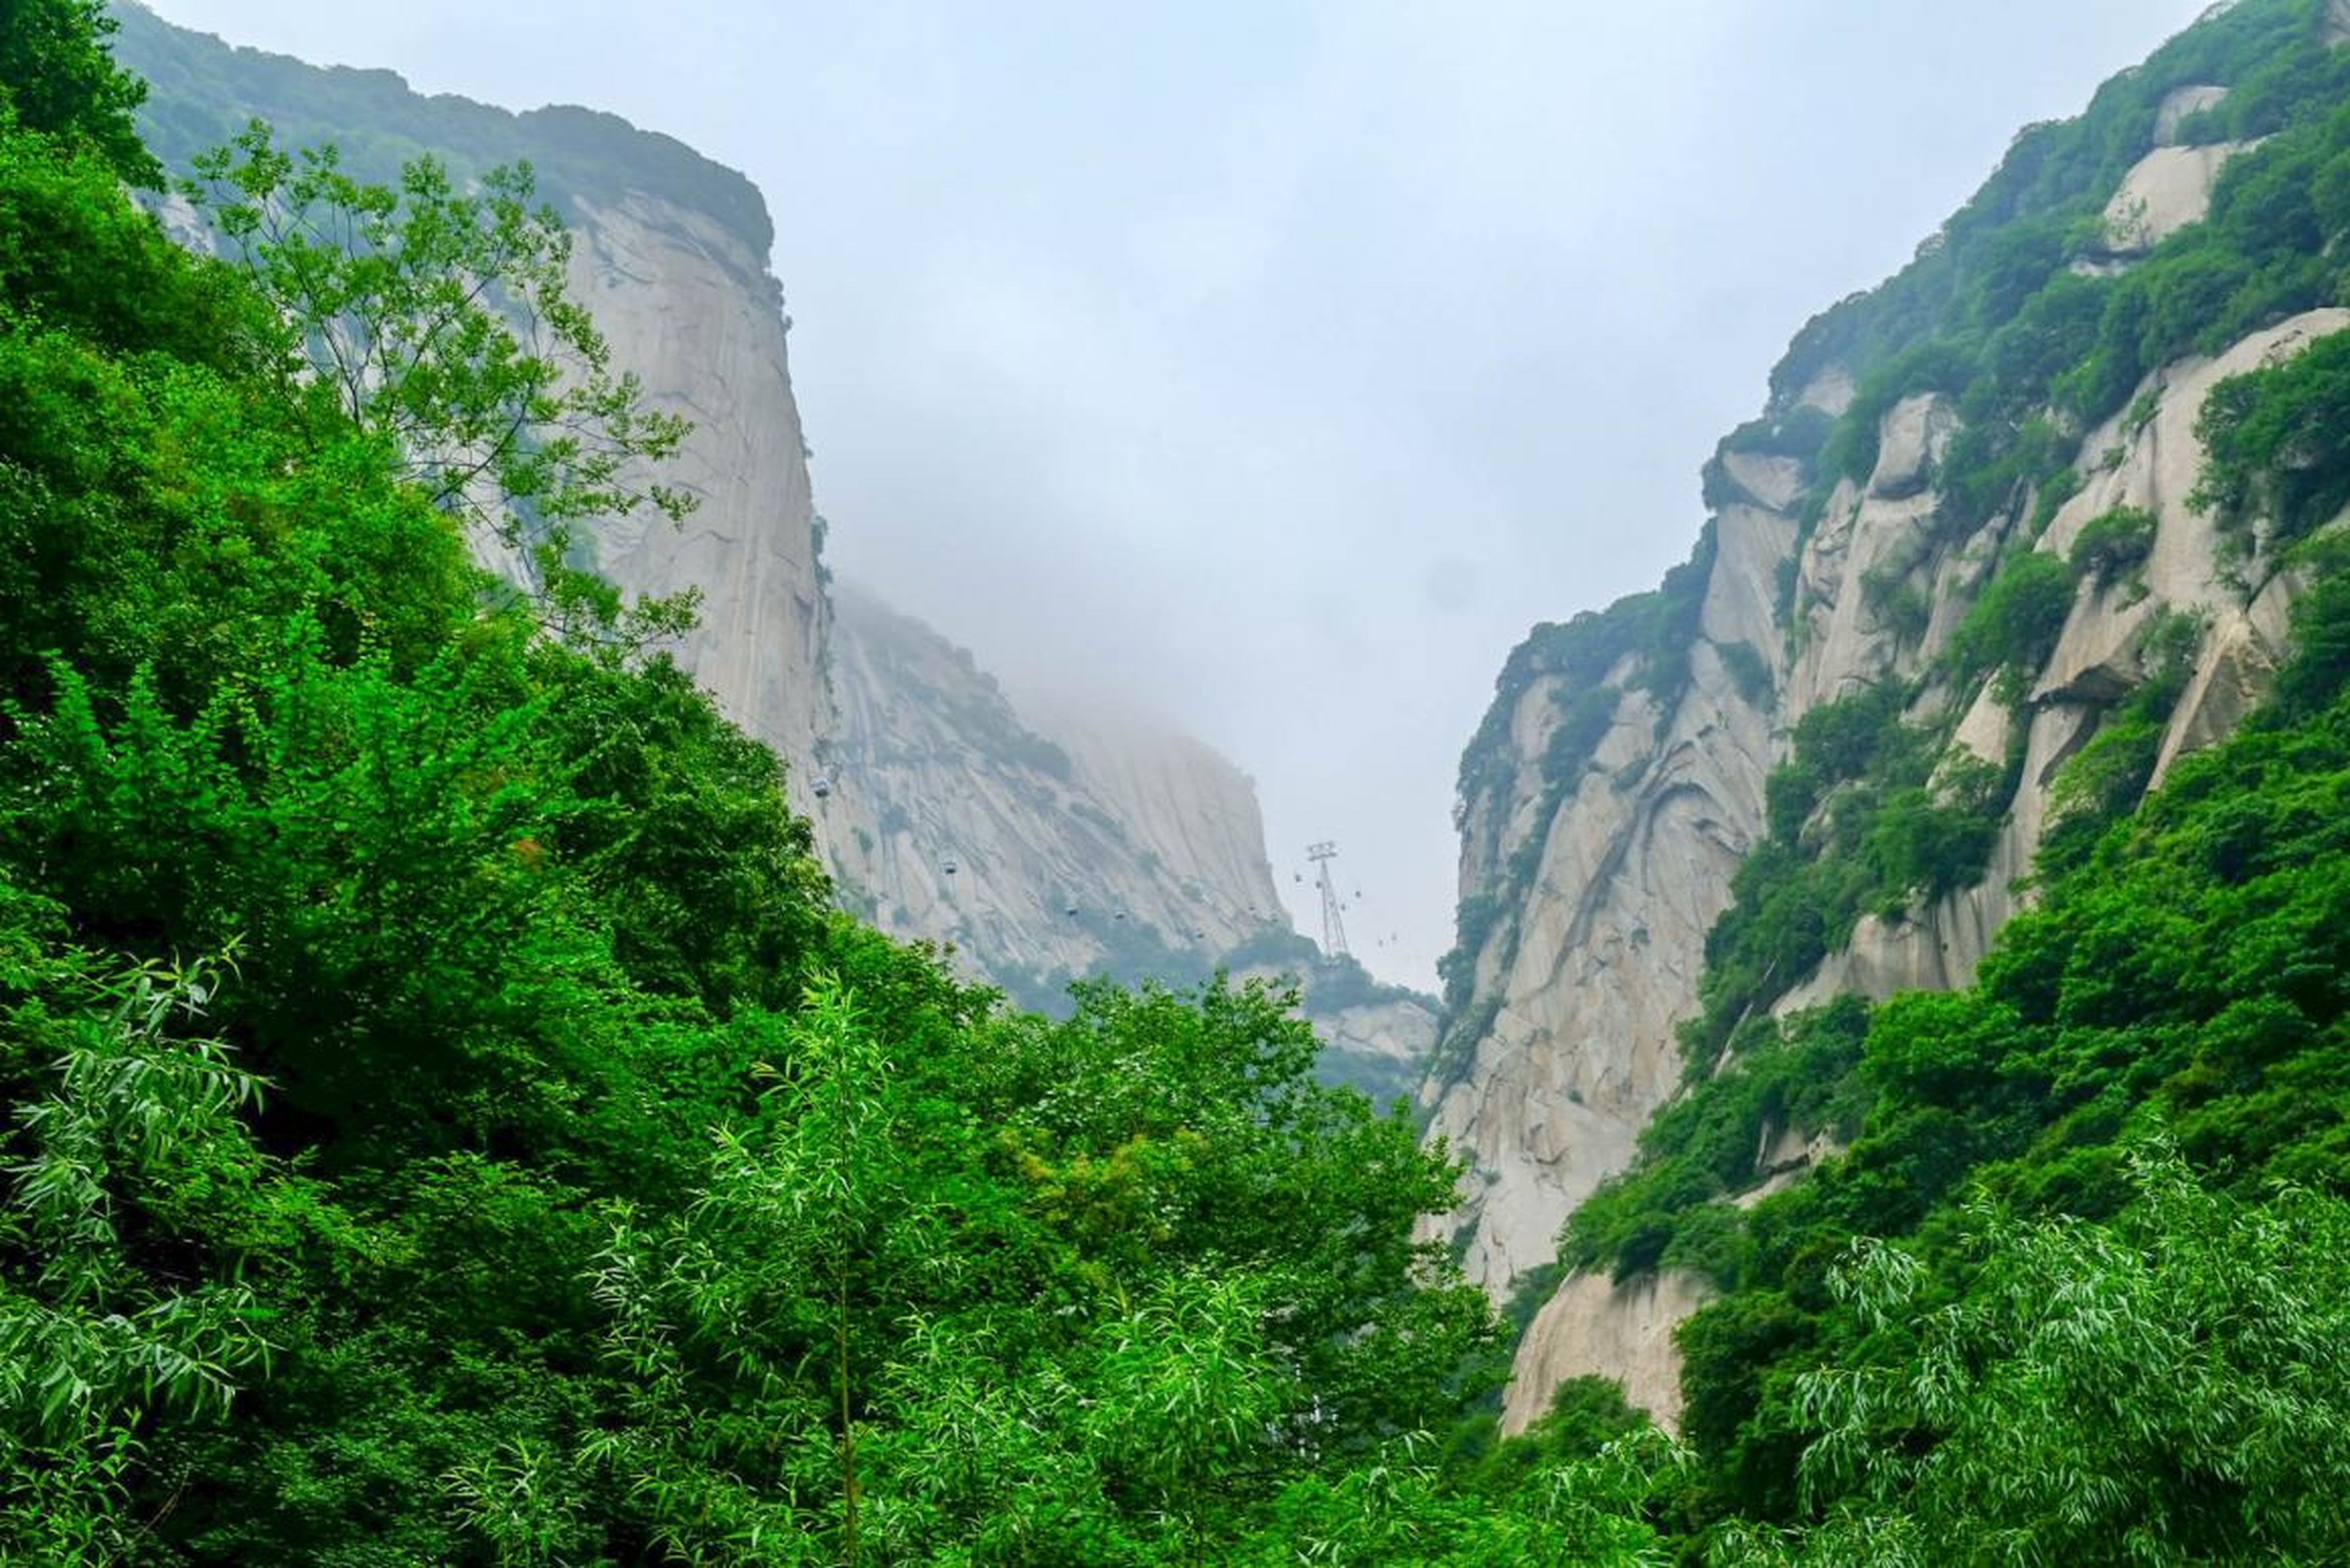 In China, I headed to Mount Hua, or Huashan, considered to be one of China's five sacred mountains and one of the most popular tourist attractions and pilgrimage sites for Chinese people. The mountain actually has five main peaks: